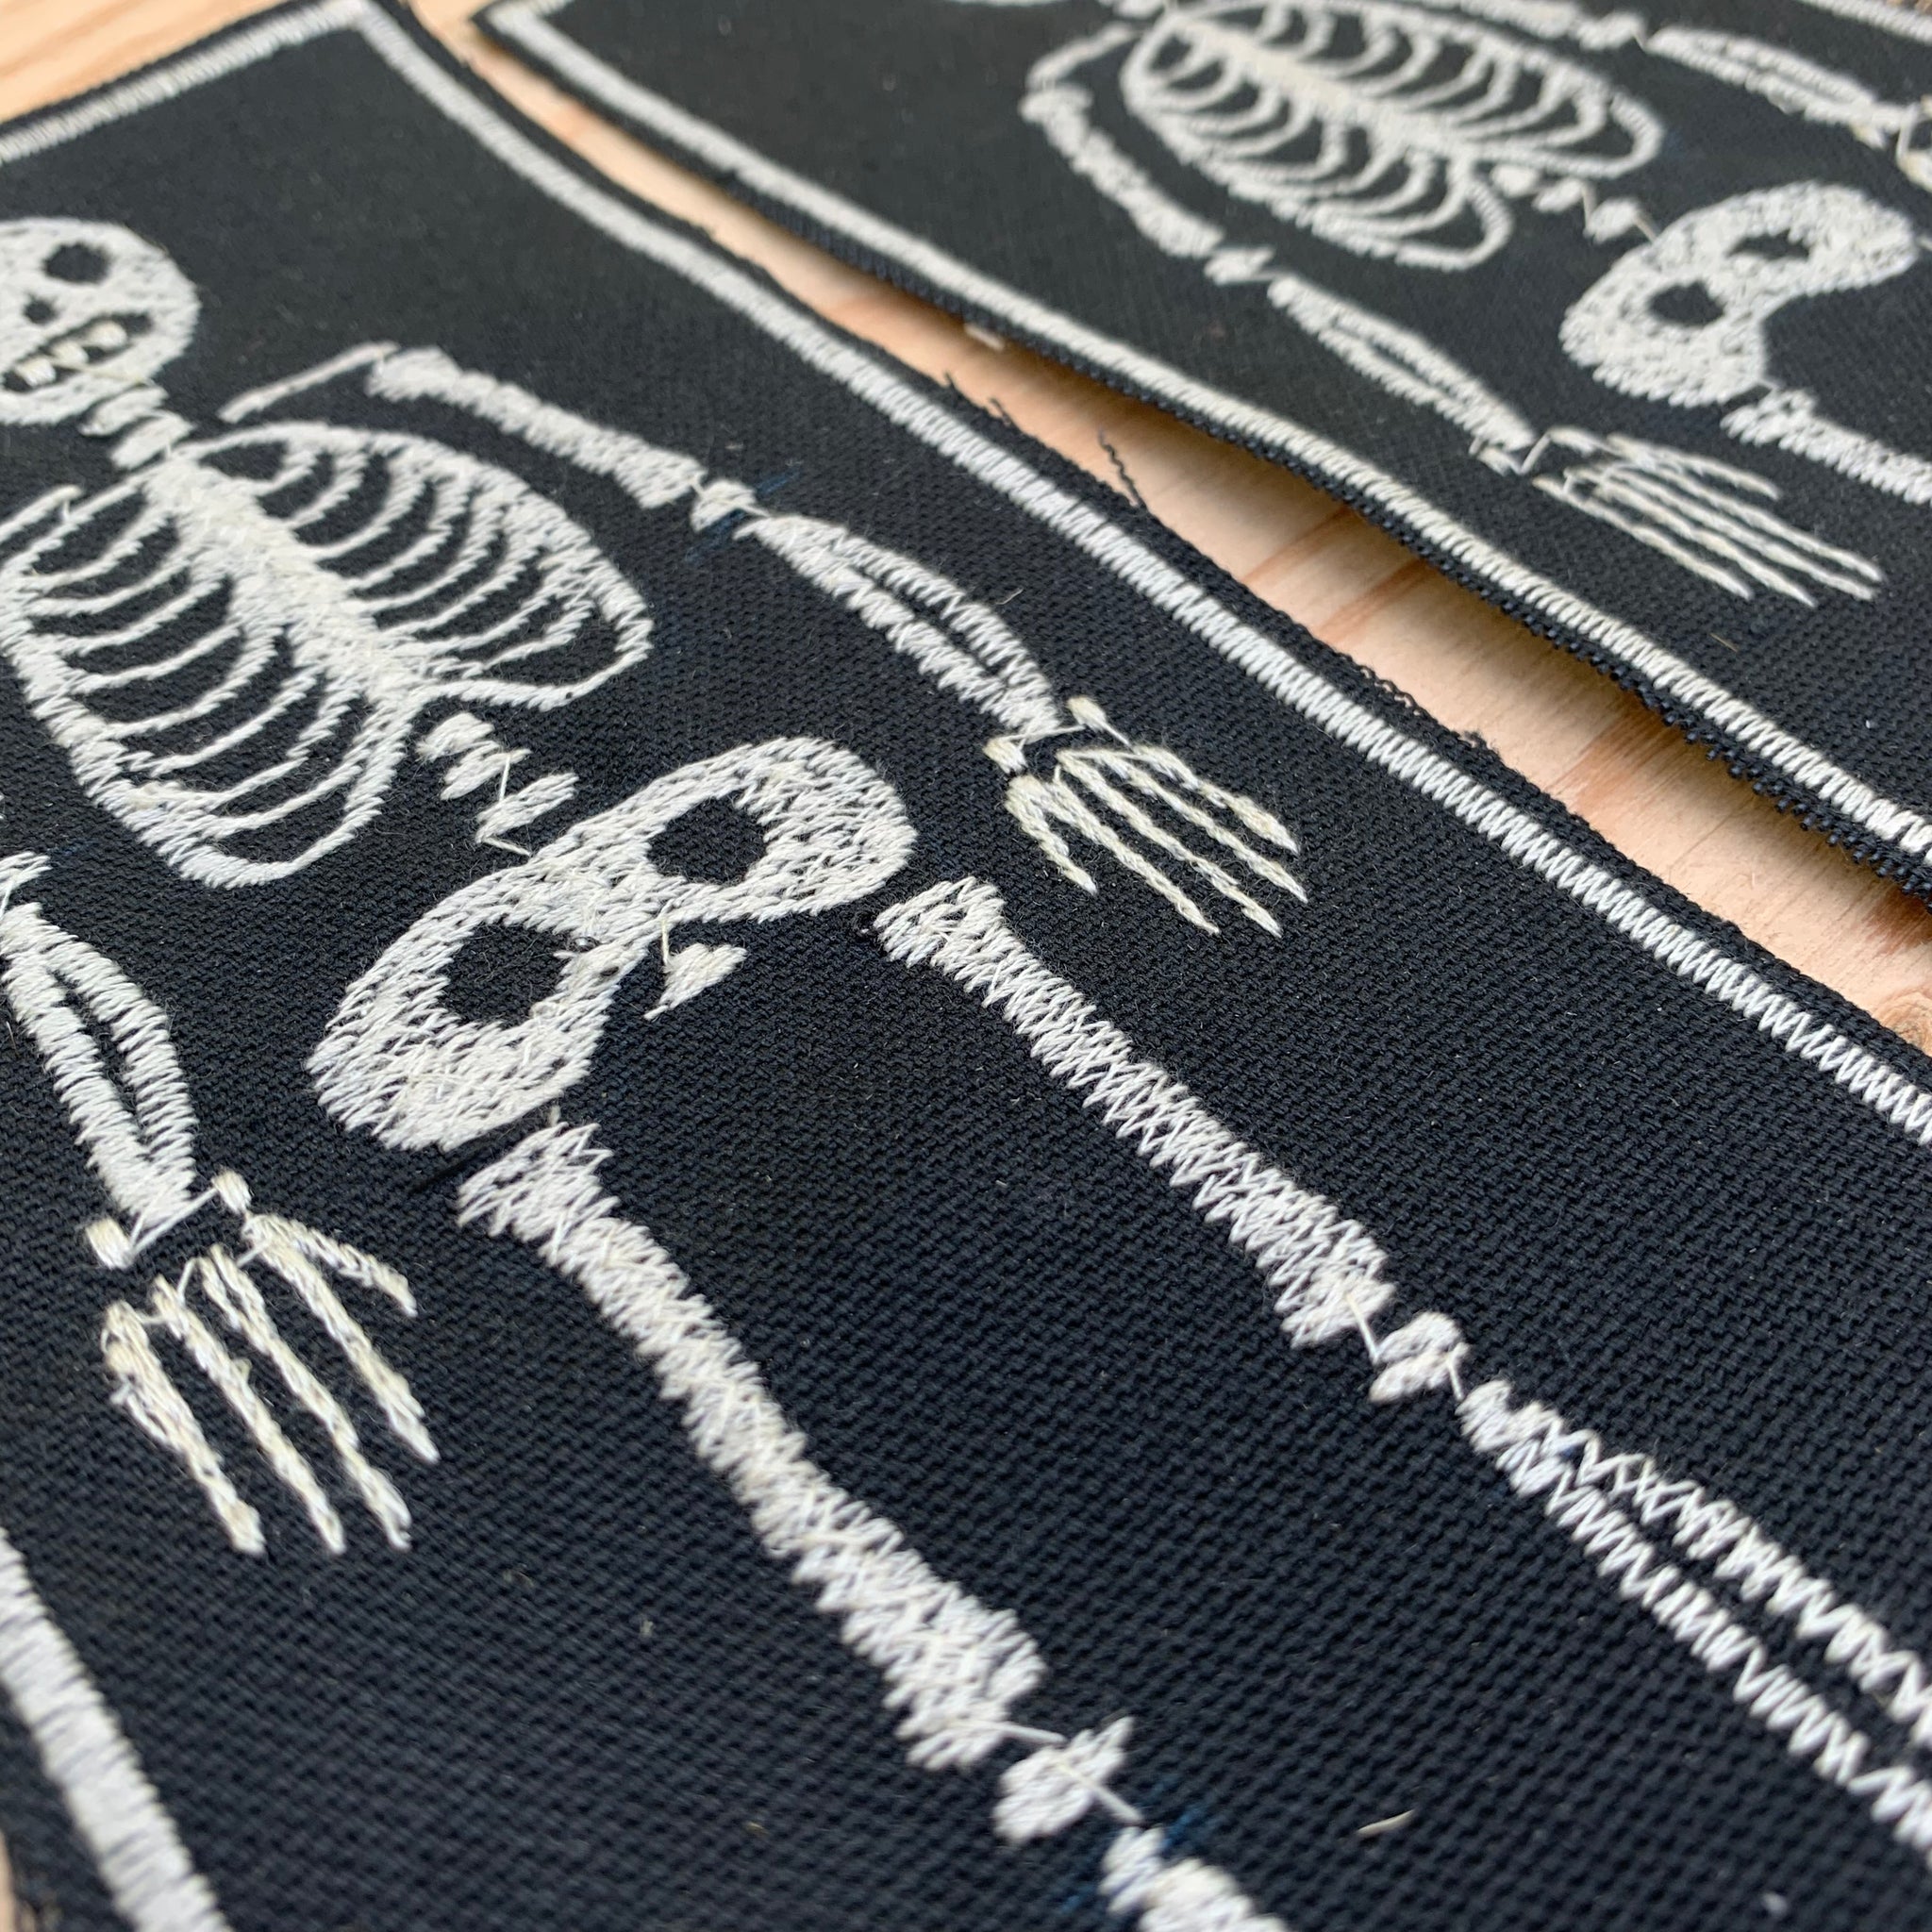 Freehand embroidered skeleton patch by artist Louis Bicycle